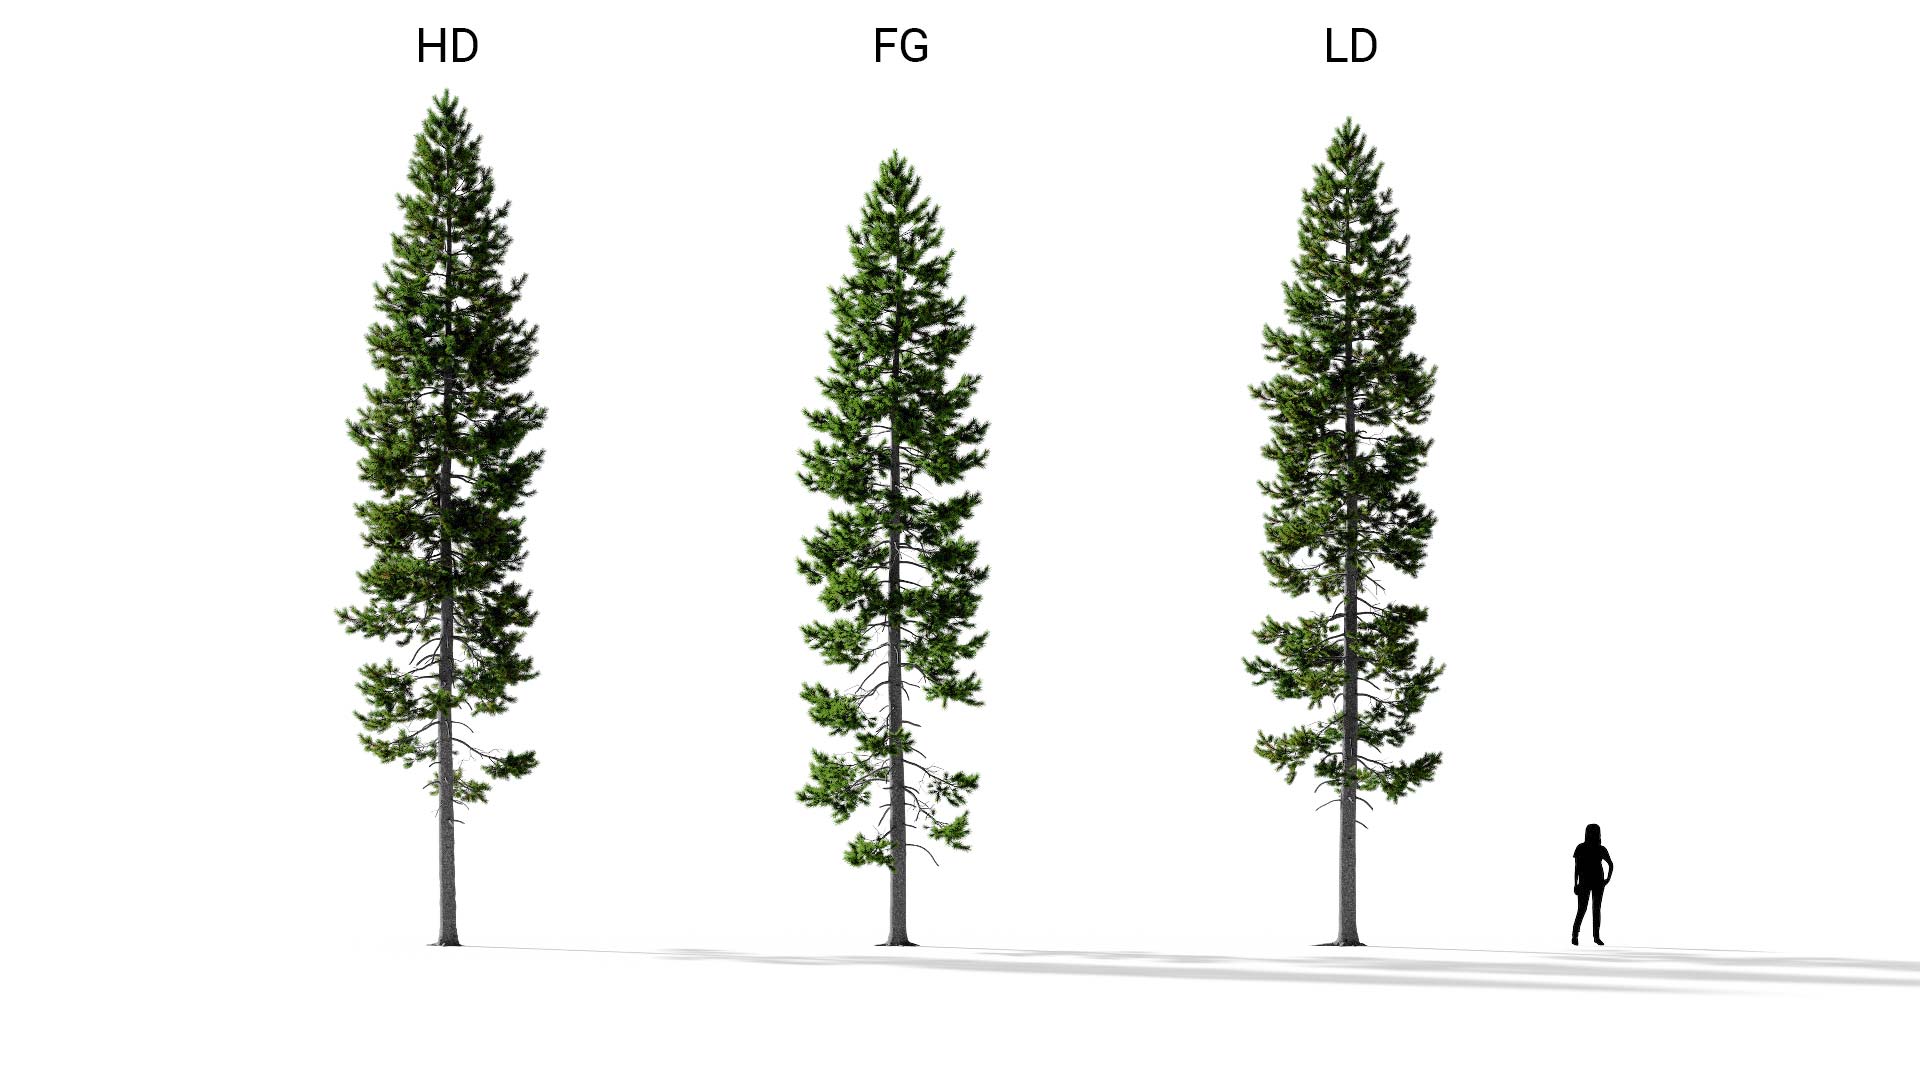 3D model of the Rocky Mountain lodgepole pine lone Pinus contorta var latifolia lone included versions